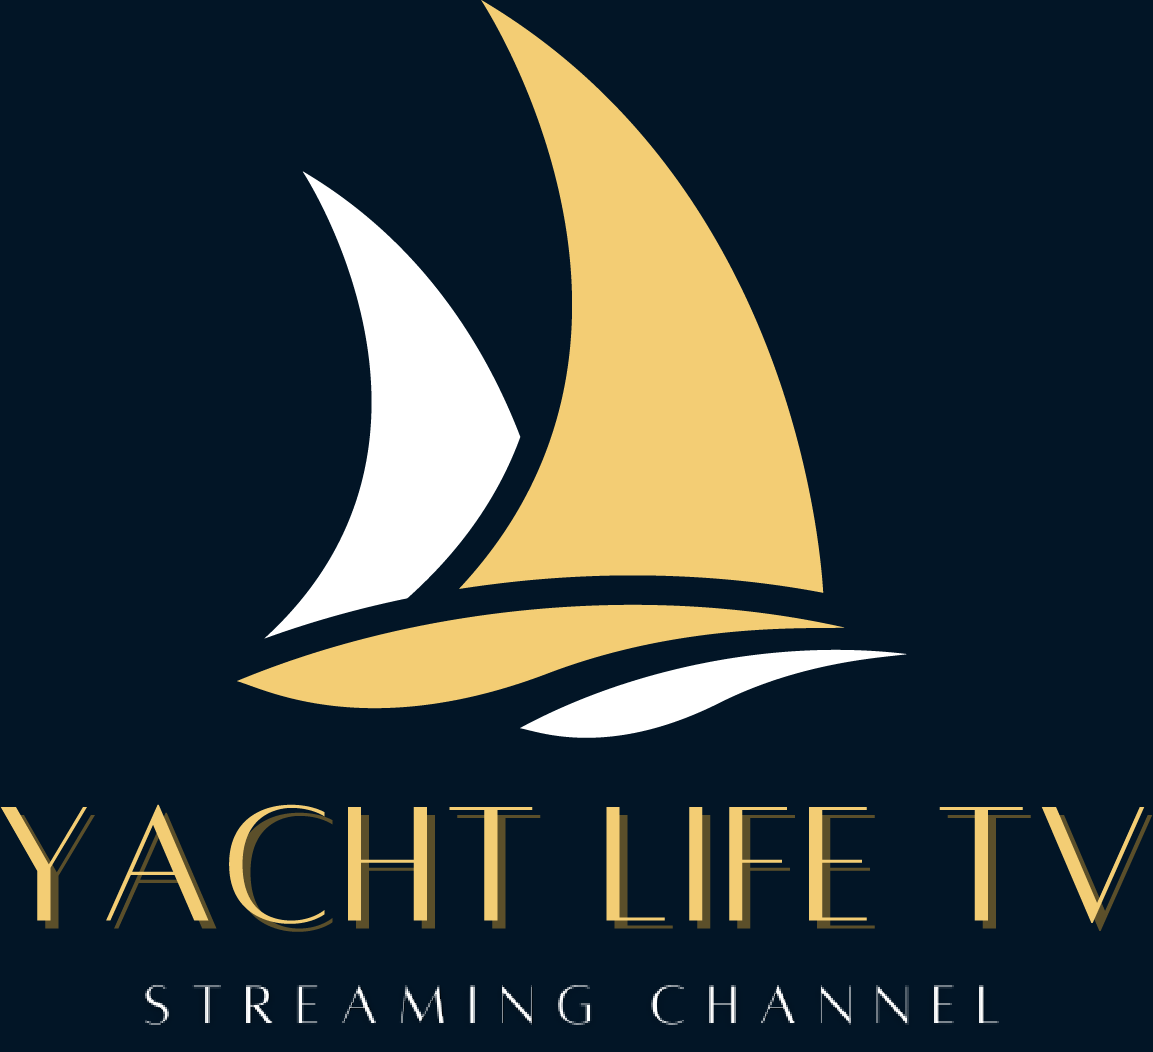 Yacht life Television